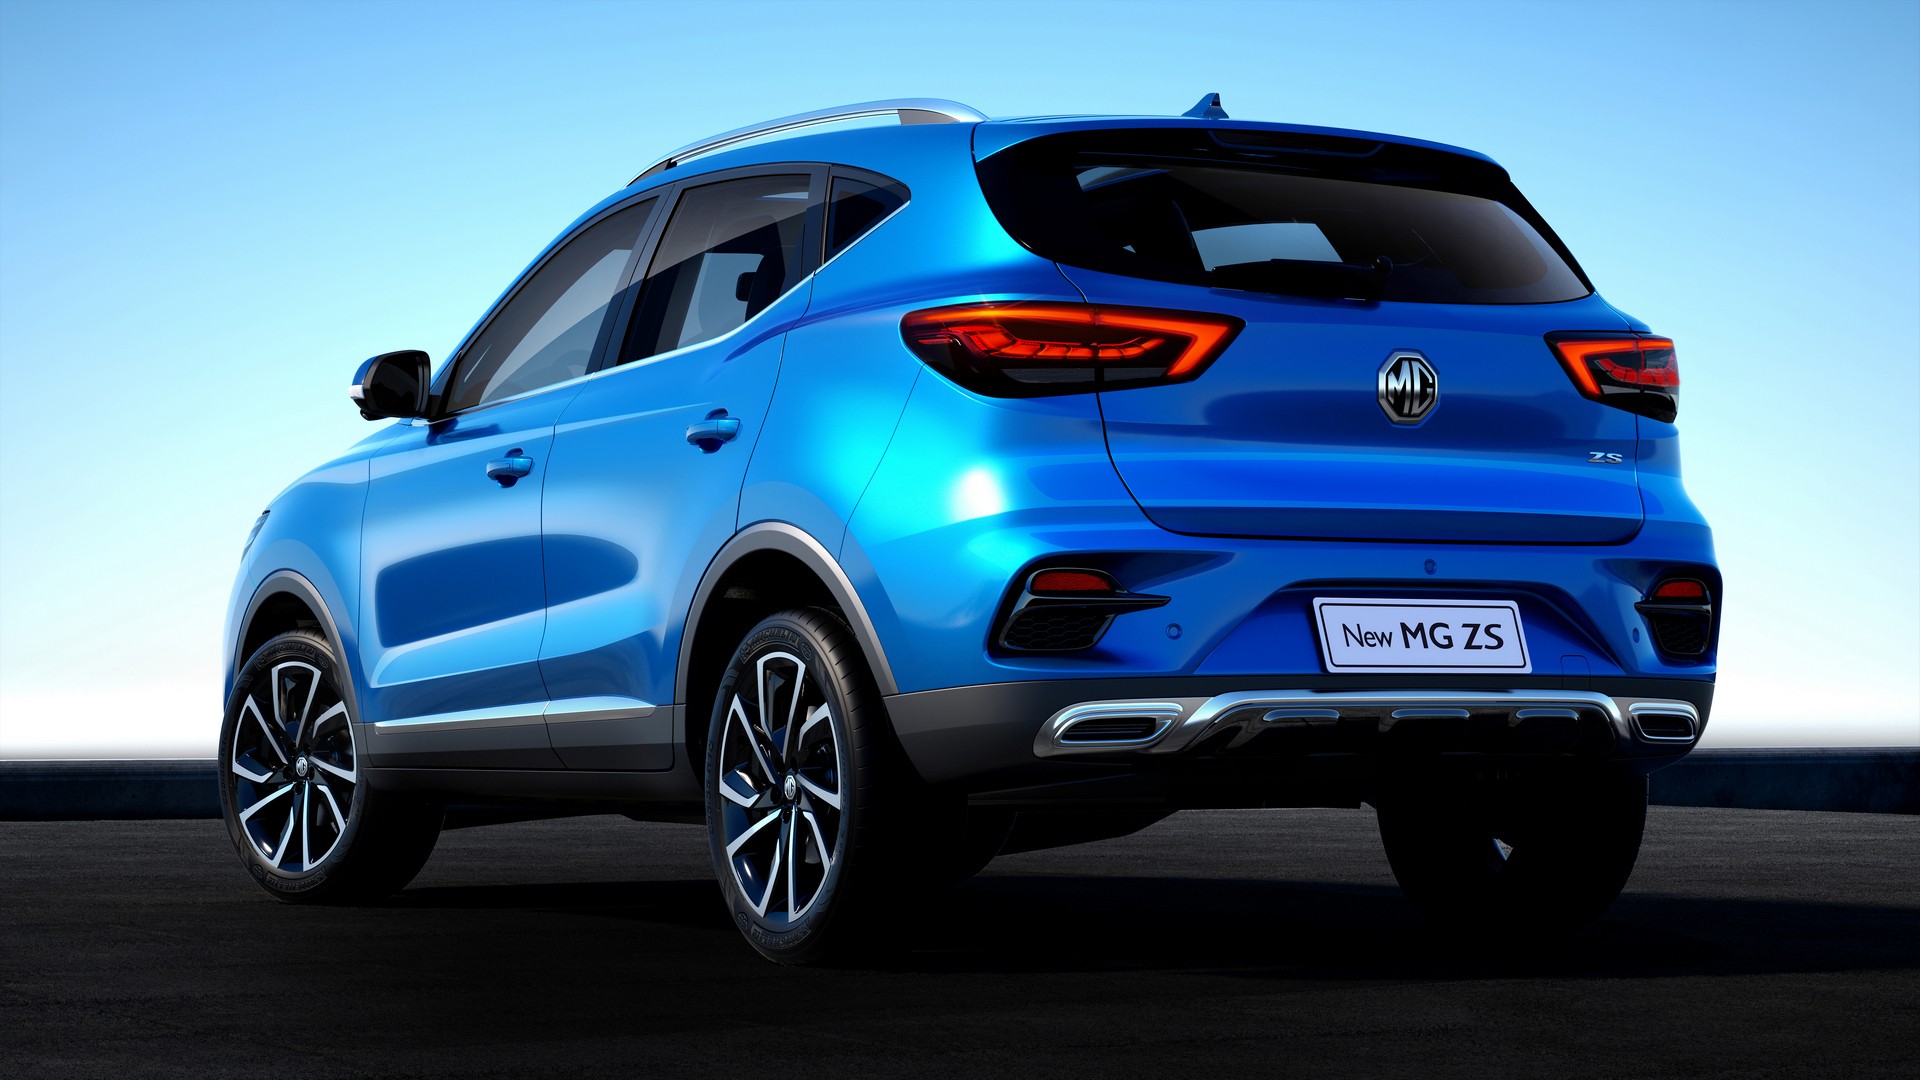 British-Born MG Motor Is Even More Asian With New Upgrade of ZS SUV